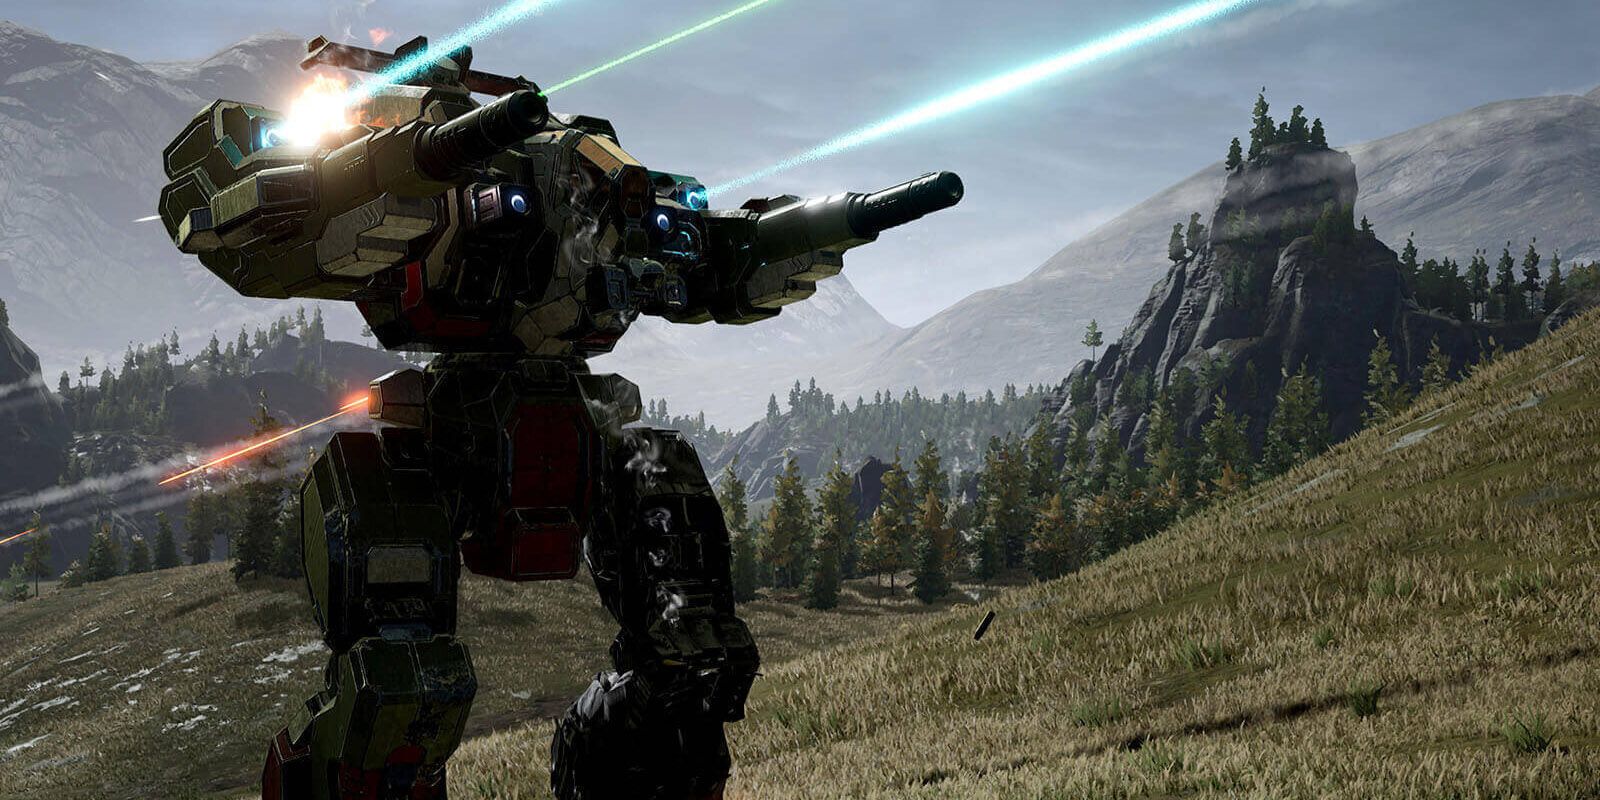 Epic Games Store Gets Mod Support, Starting With MechWarrior 5